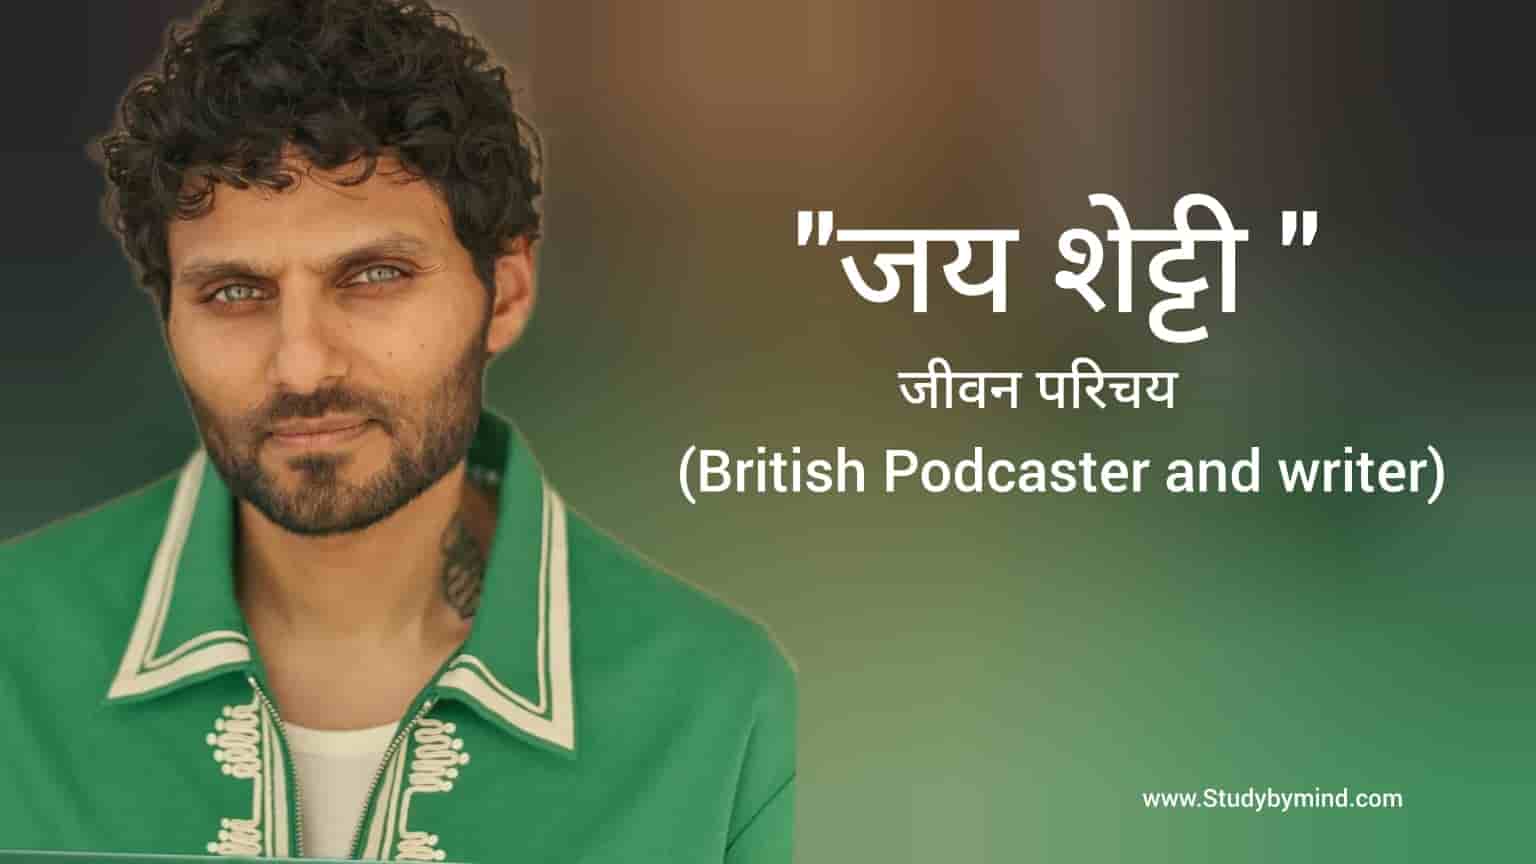 You are currently viewing जय शेट्टी जीवन परिचय Jay shetty biography in hindi (Writer तथा Podcaster)